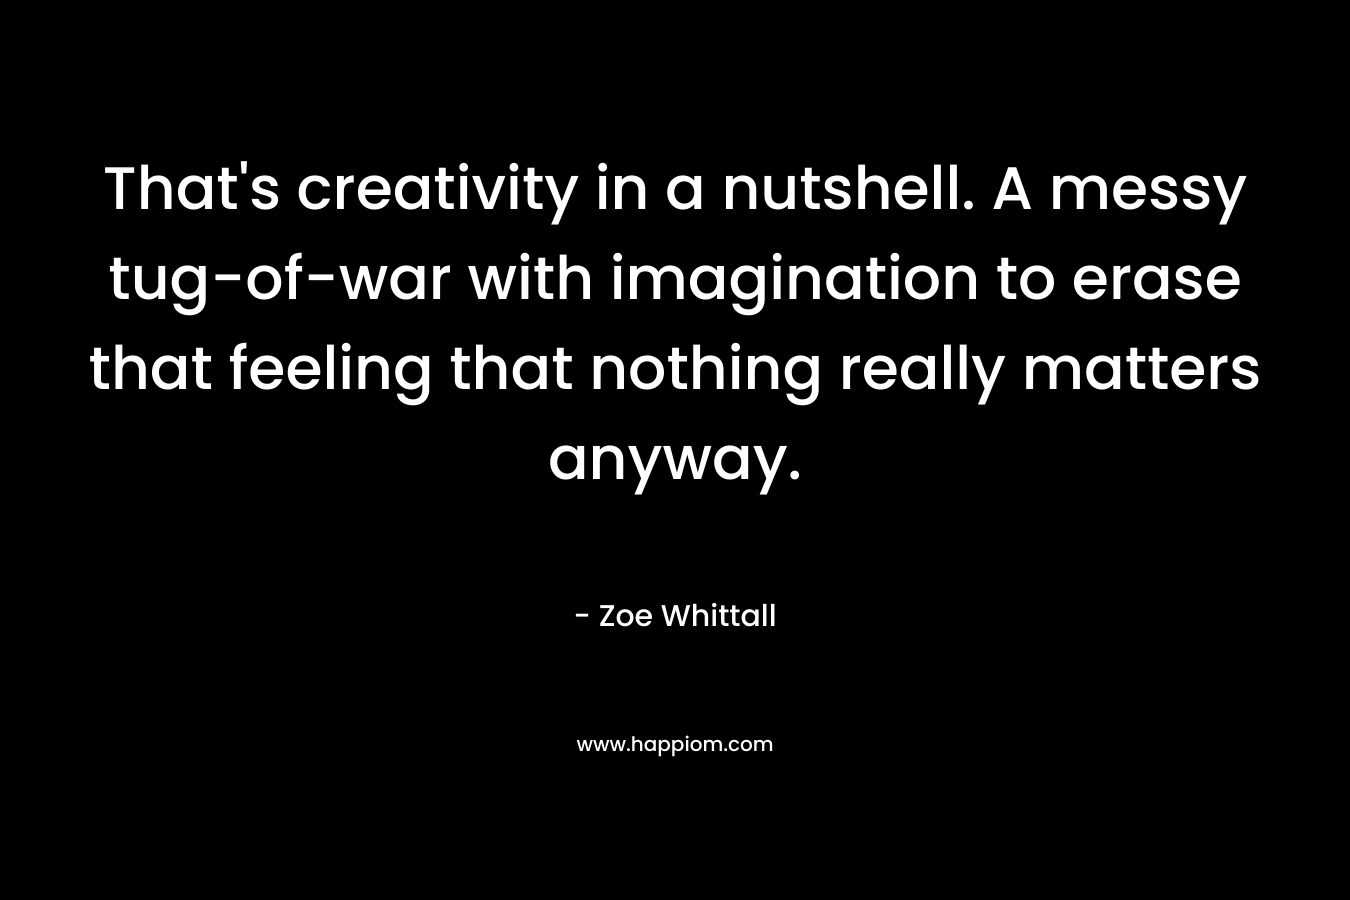 That's creativity in a nutshell. A messy tug-of-war with imagination to erase that feeling that nothing really matters anyway.